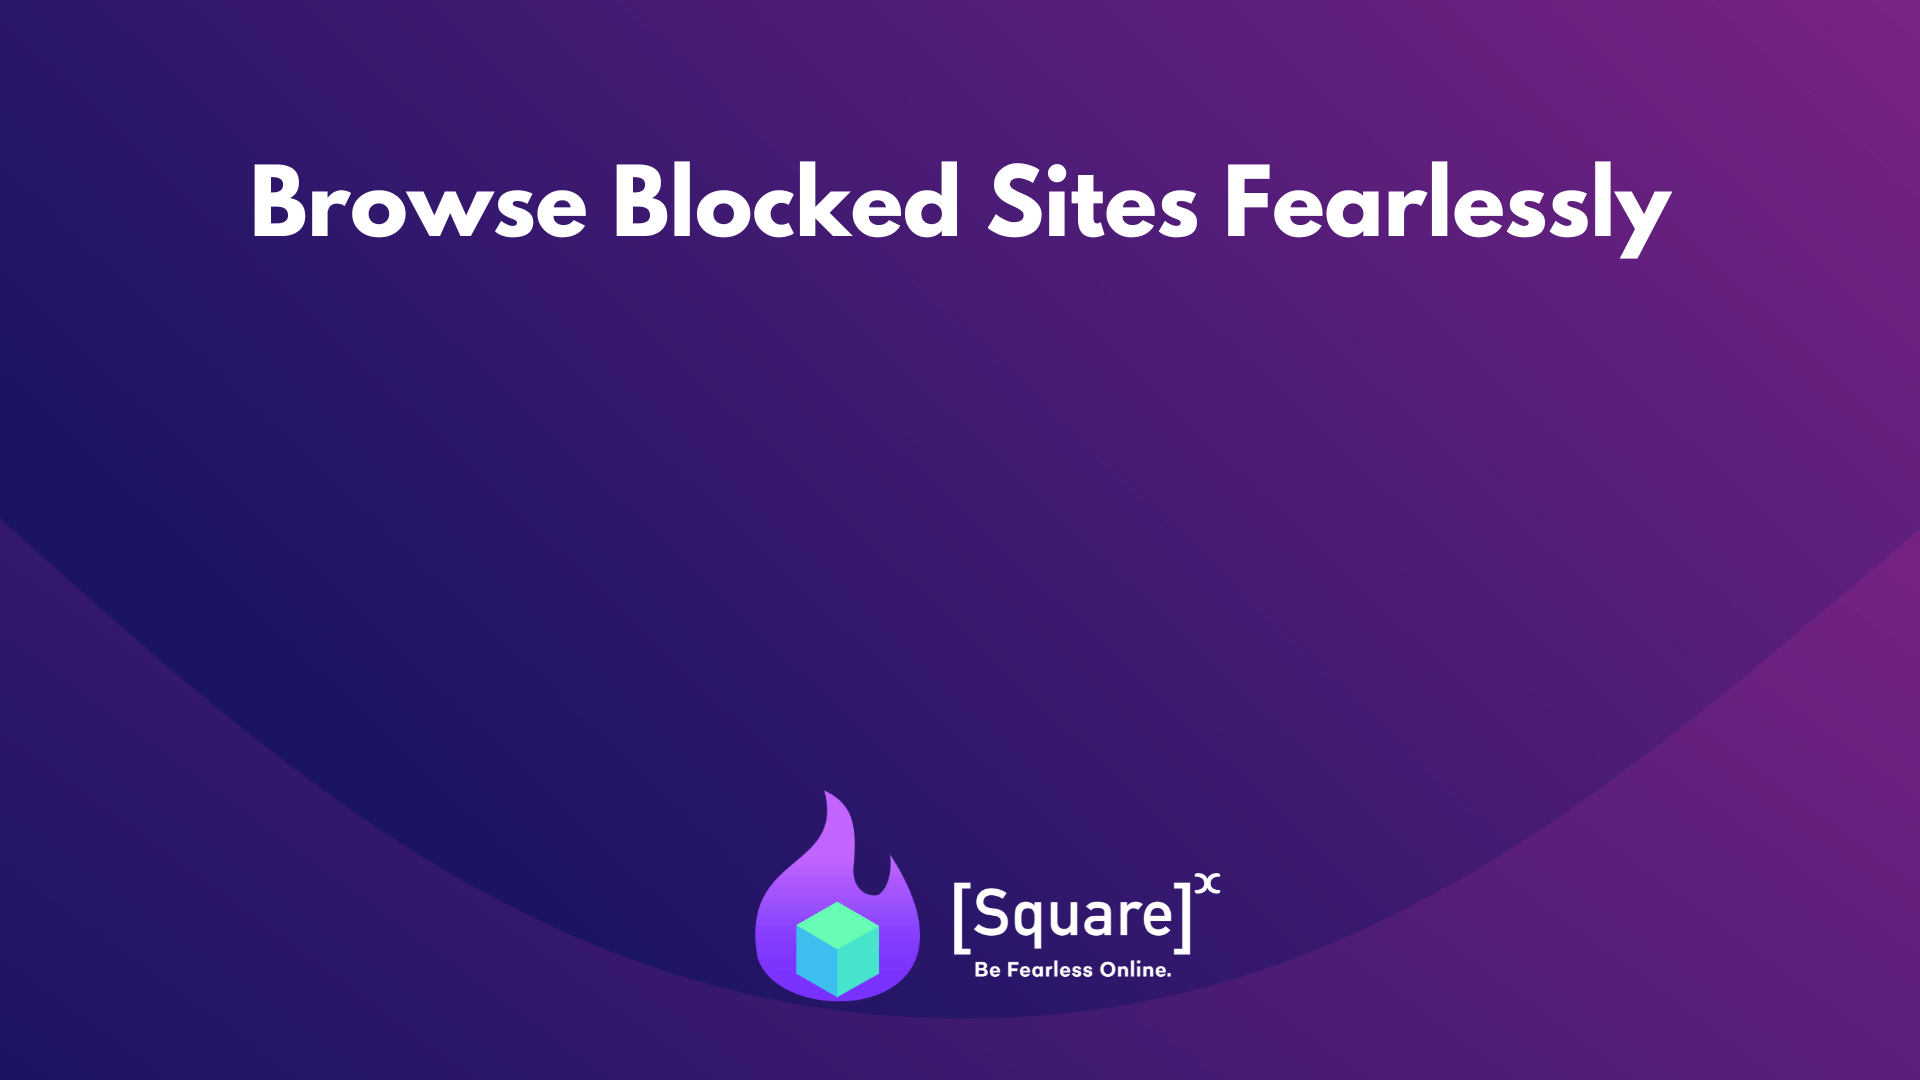 Browse blocked sites fearlessly